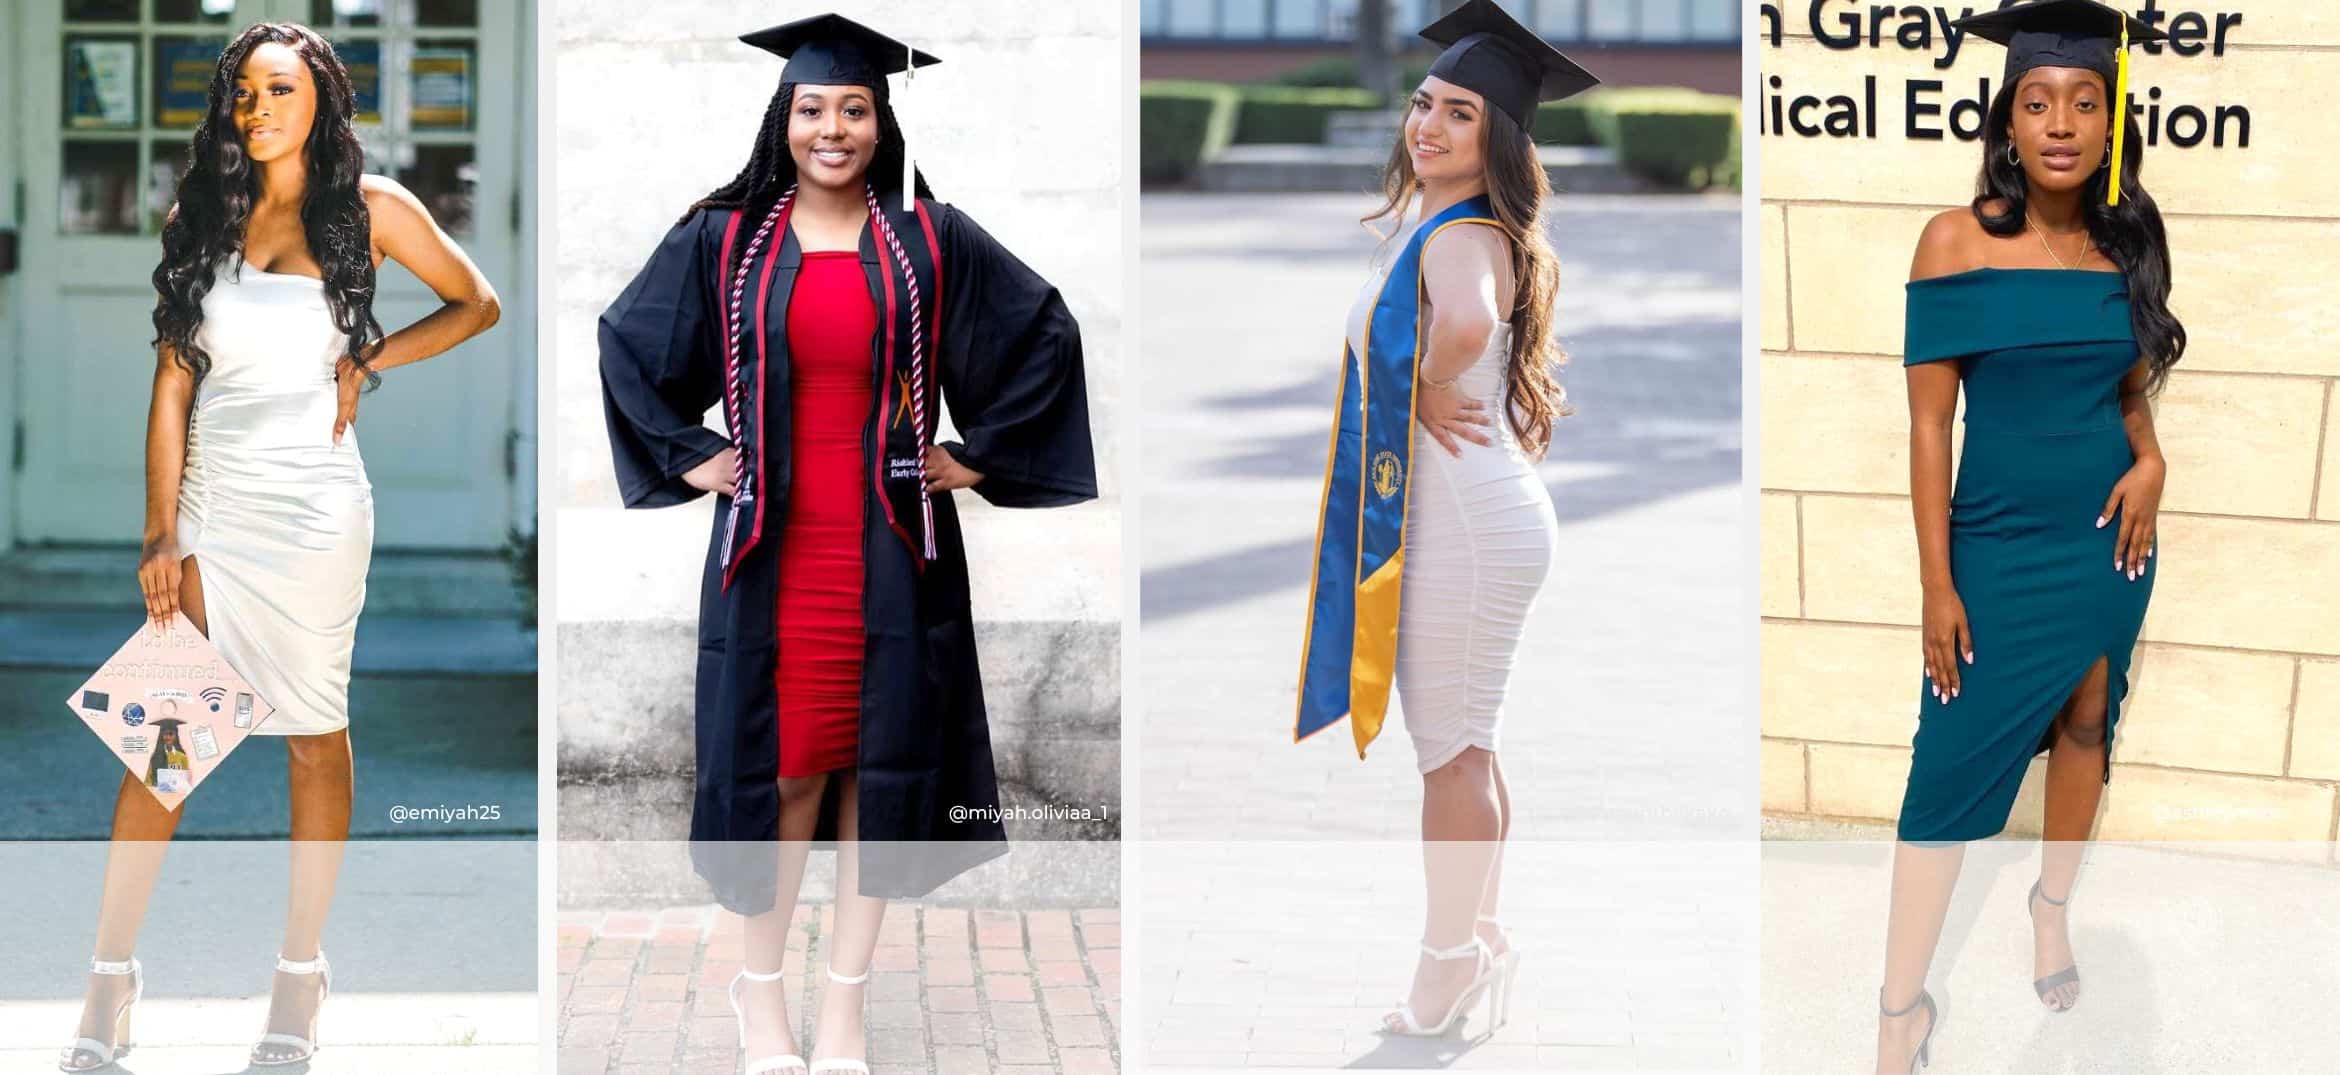 Need Graduation Dress Ideas for Curvy Women This Spring. Check Out These 10 Must-Have Styles